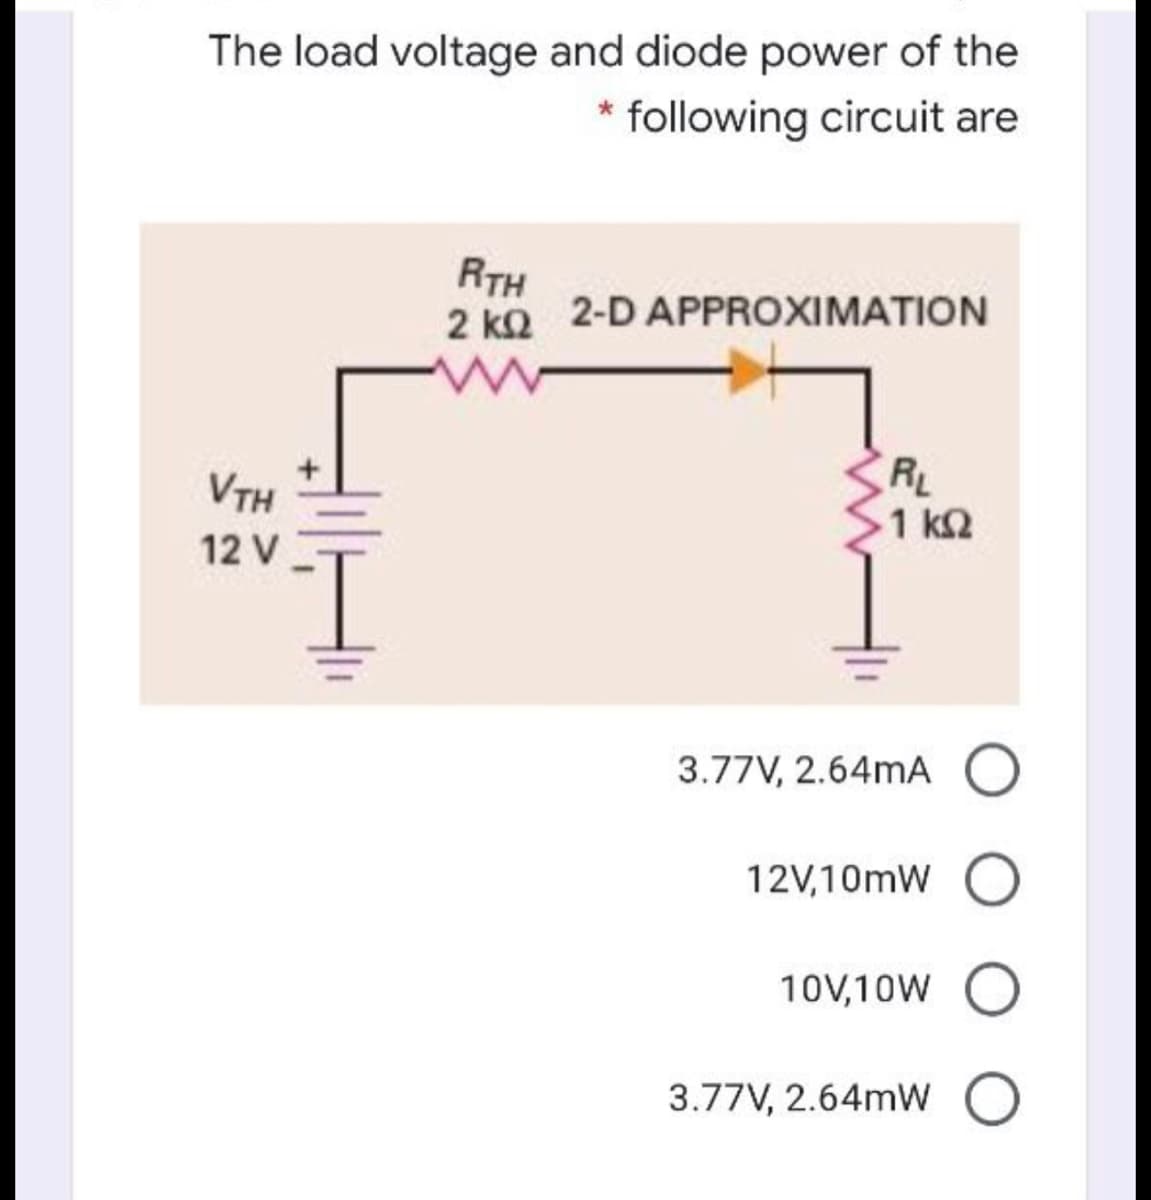 The load voltage and diode power of the
* following circuit are
RTH
2 kQ 2-D APPROXIMATION
VTH
12 V
RL
1 k2
3.77V, 2.64mA O
12V,10mW
10V,10W O
3.77V, 2.64mW
